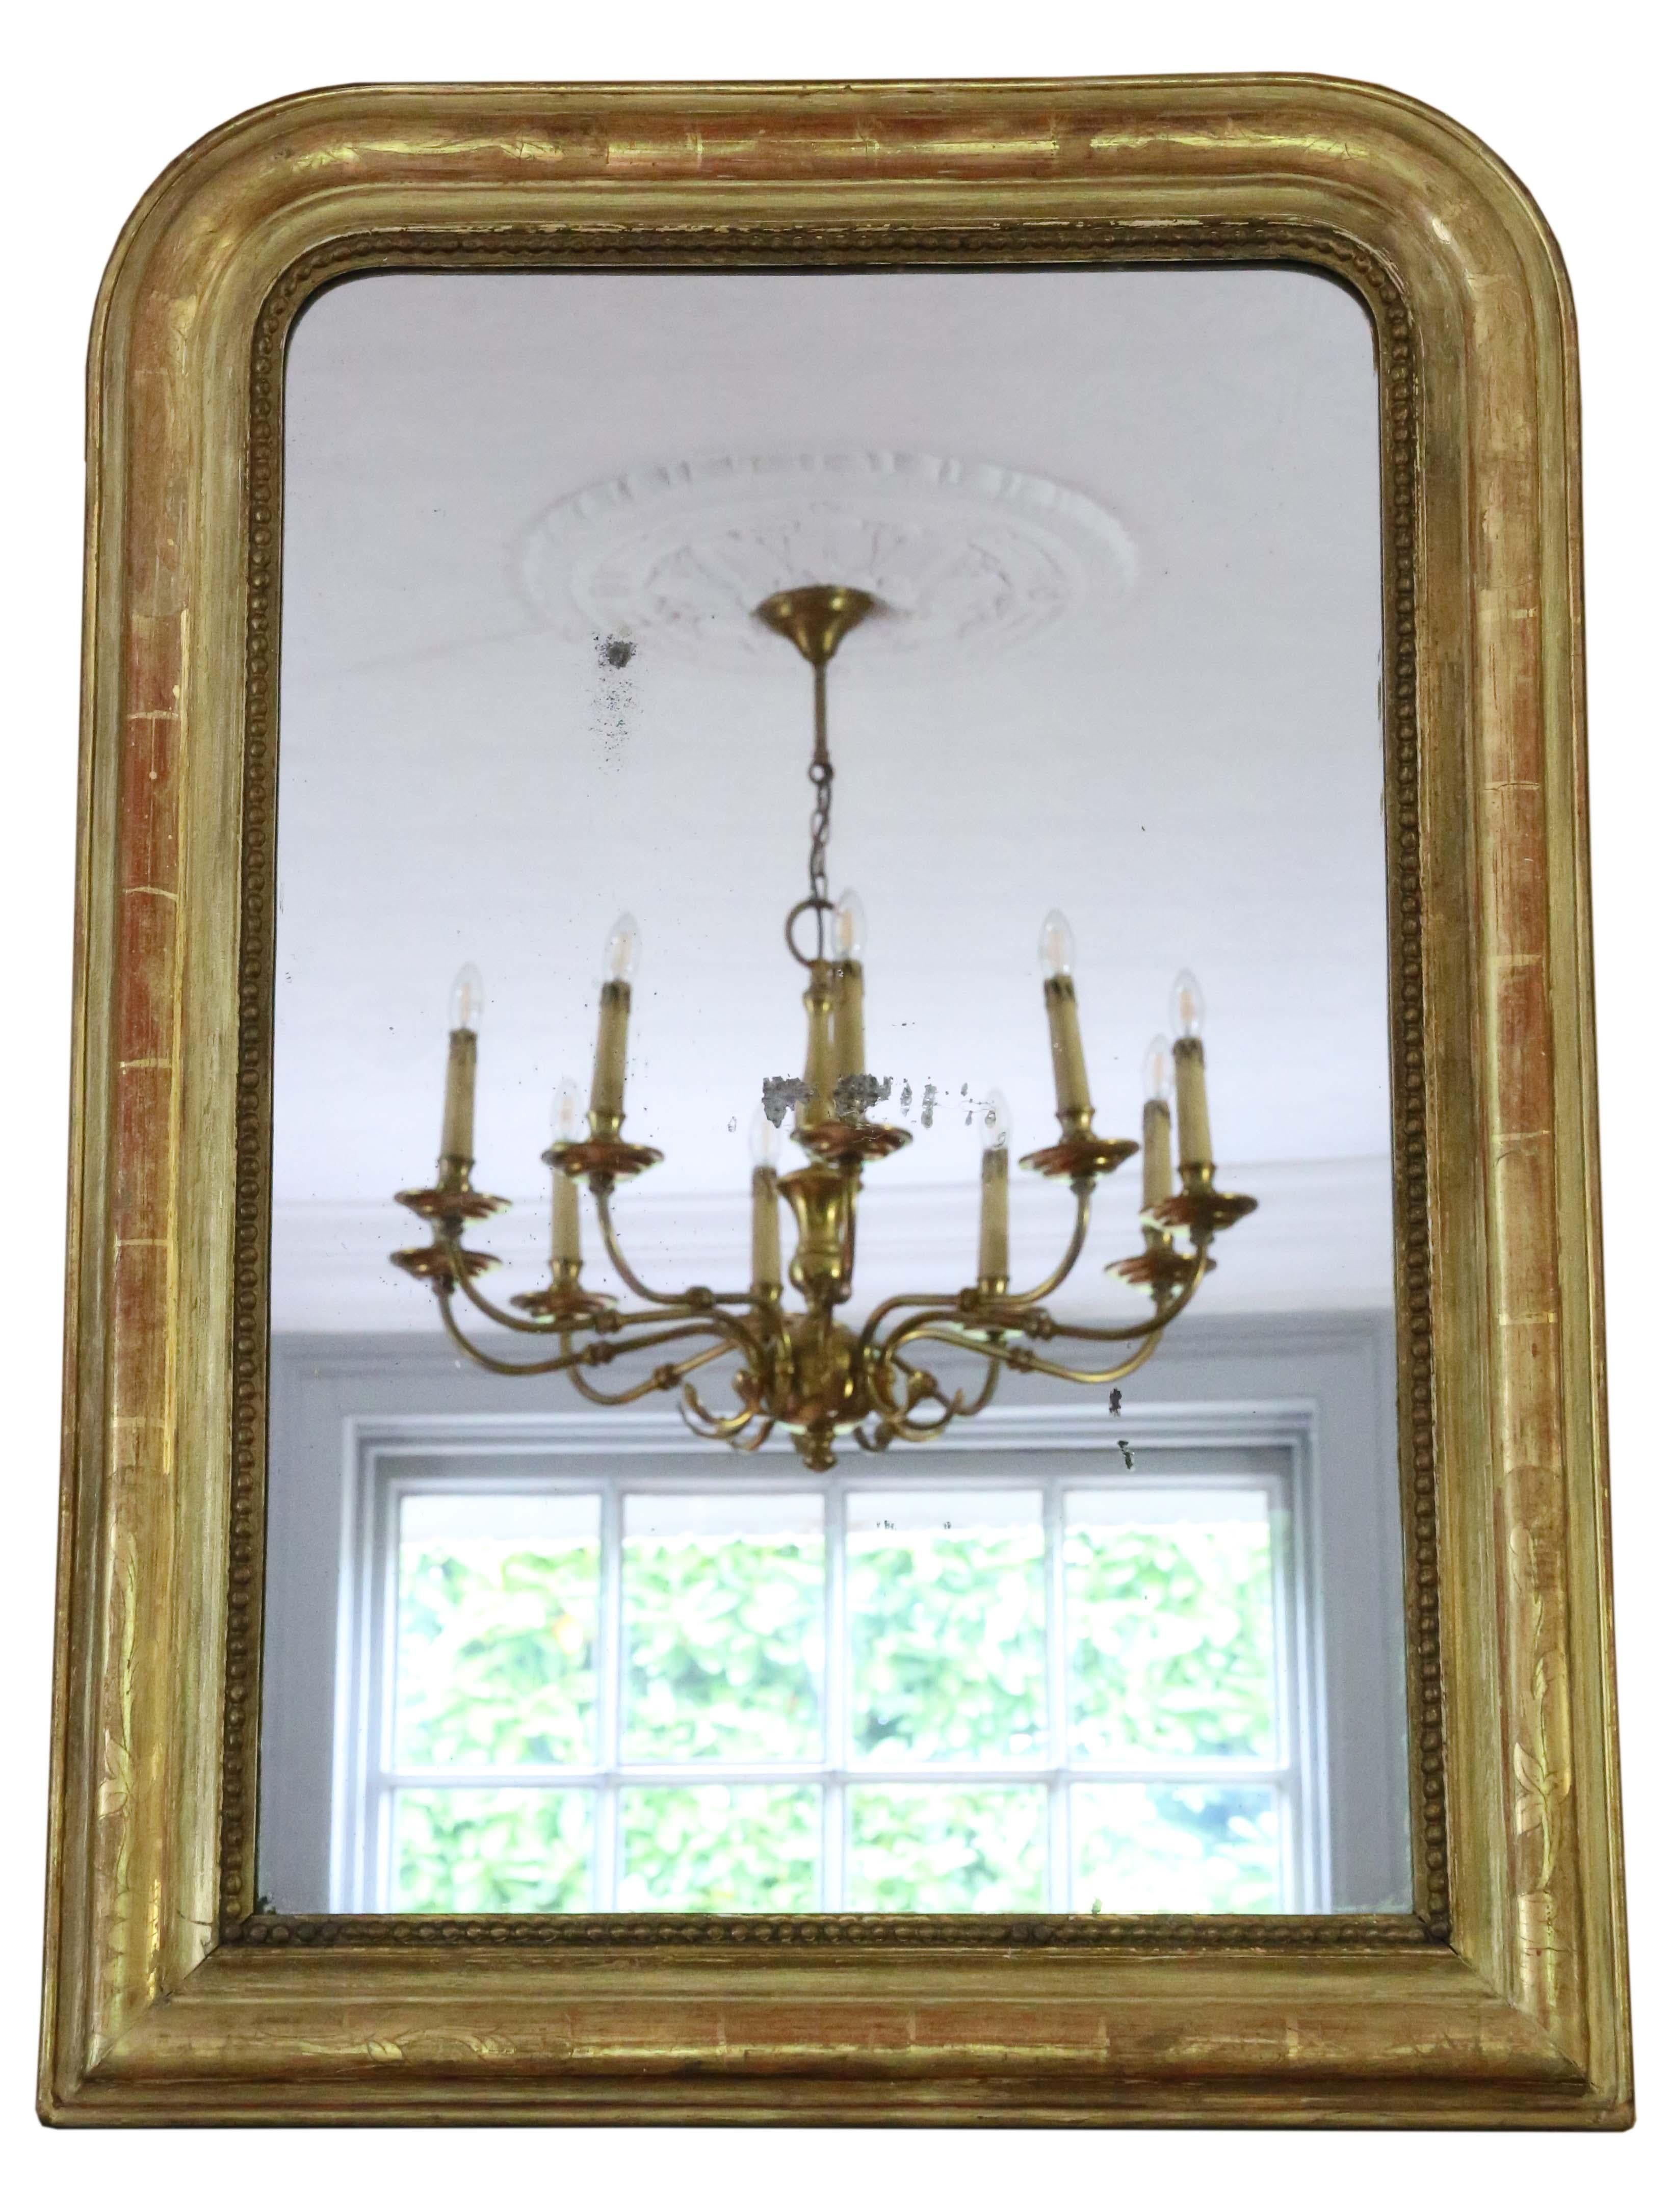 Antique shaped 19th Century large quality gilt overmantle or wall mirror. Lovely charm and elegance. Original finish with minor losses, refinishing and touching up.

An impressive find, that would look amazing in the right location. No loose